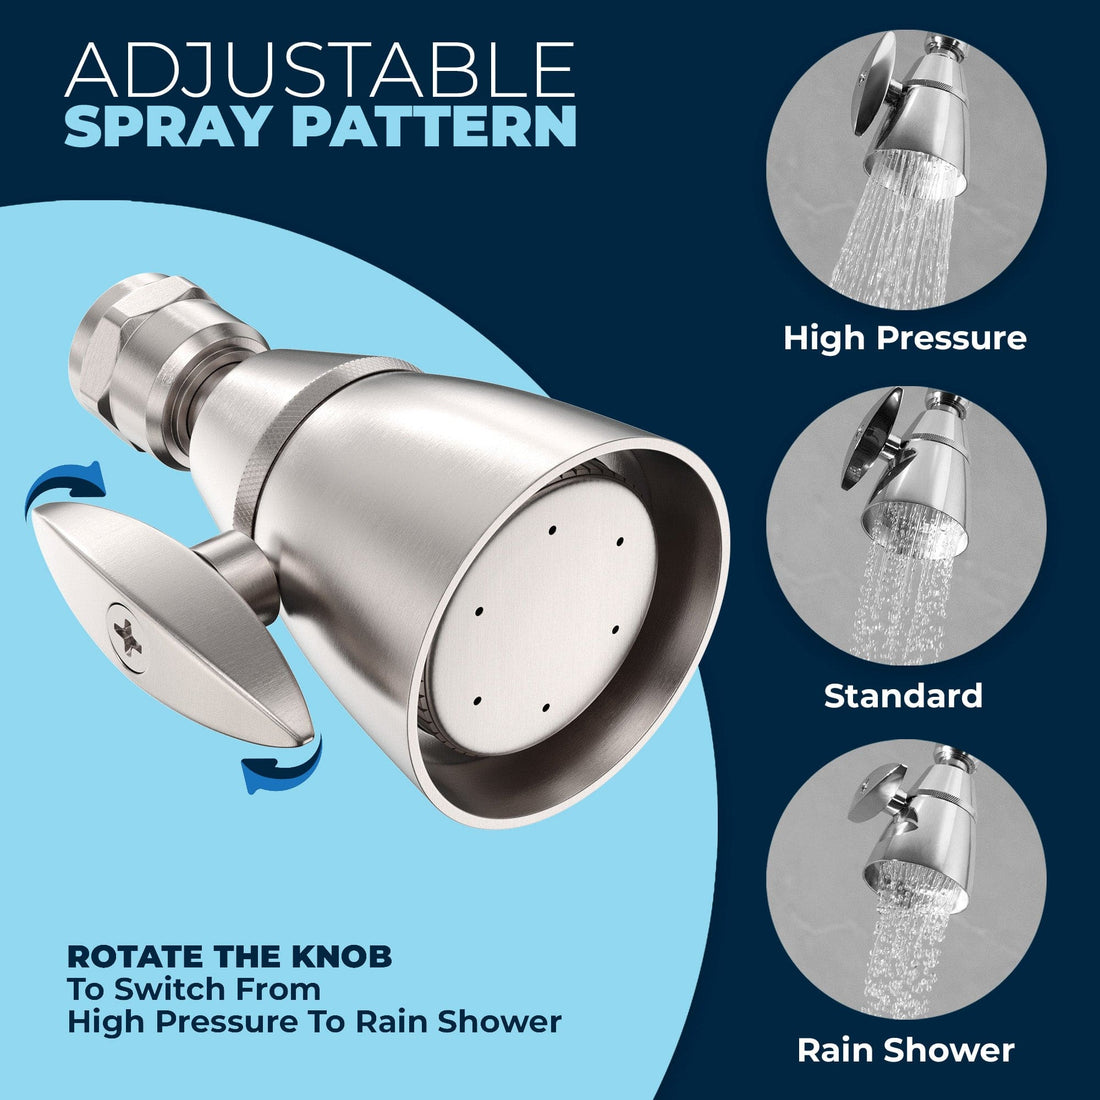 Adjustable Spray Fixed Small Shower Head Adjusts Angle Up to 23 Degrees Brushed Nickel / 2.5 - The Shower Head Store